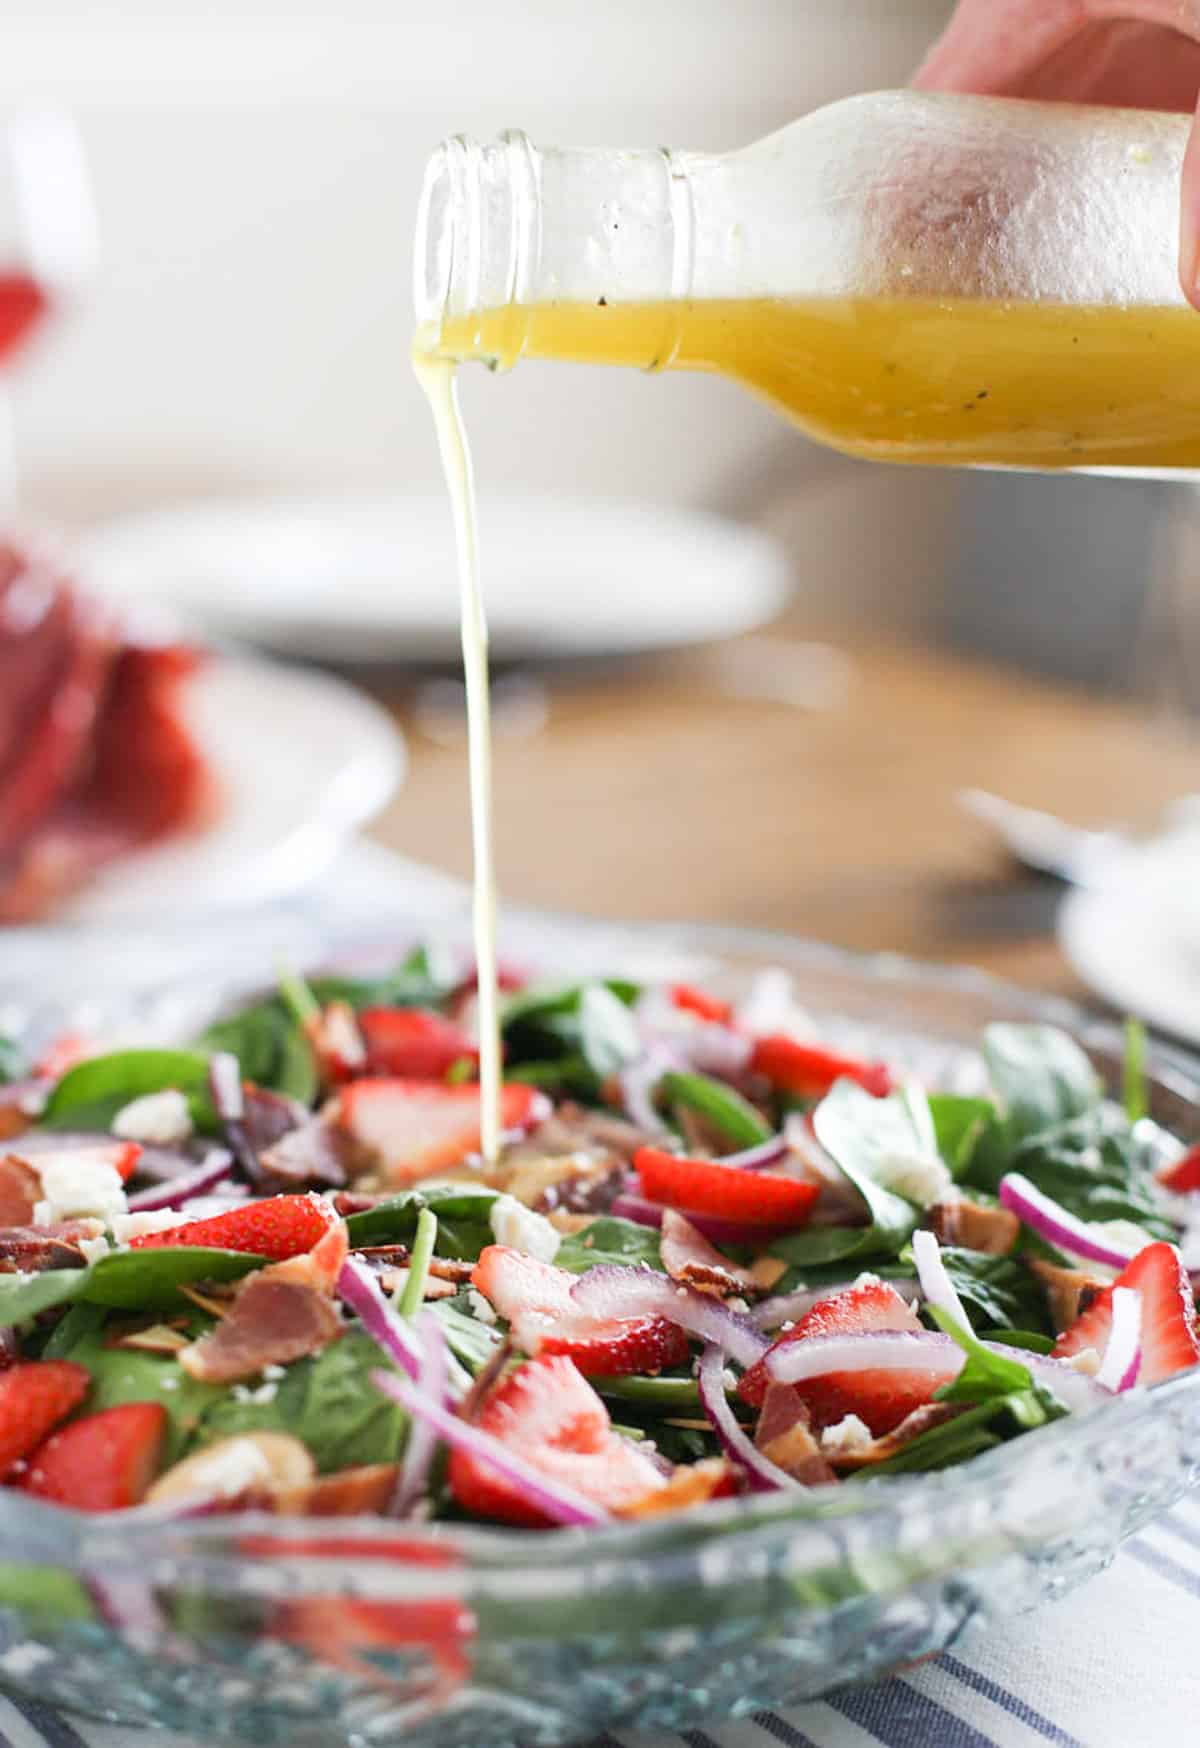 Lemon honey vinaigrette being poured onto a spinach salad with bacon, cheese, red onion, and strawberries on top.